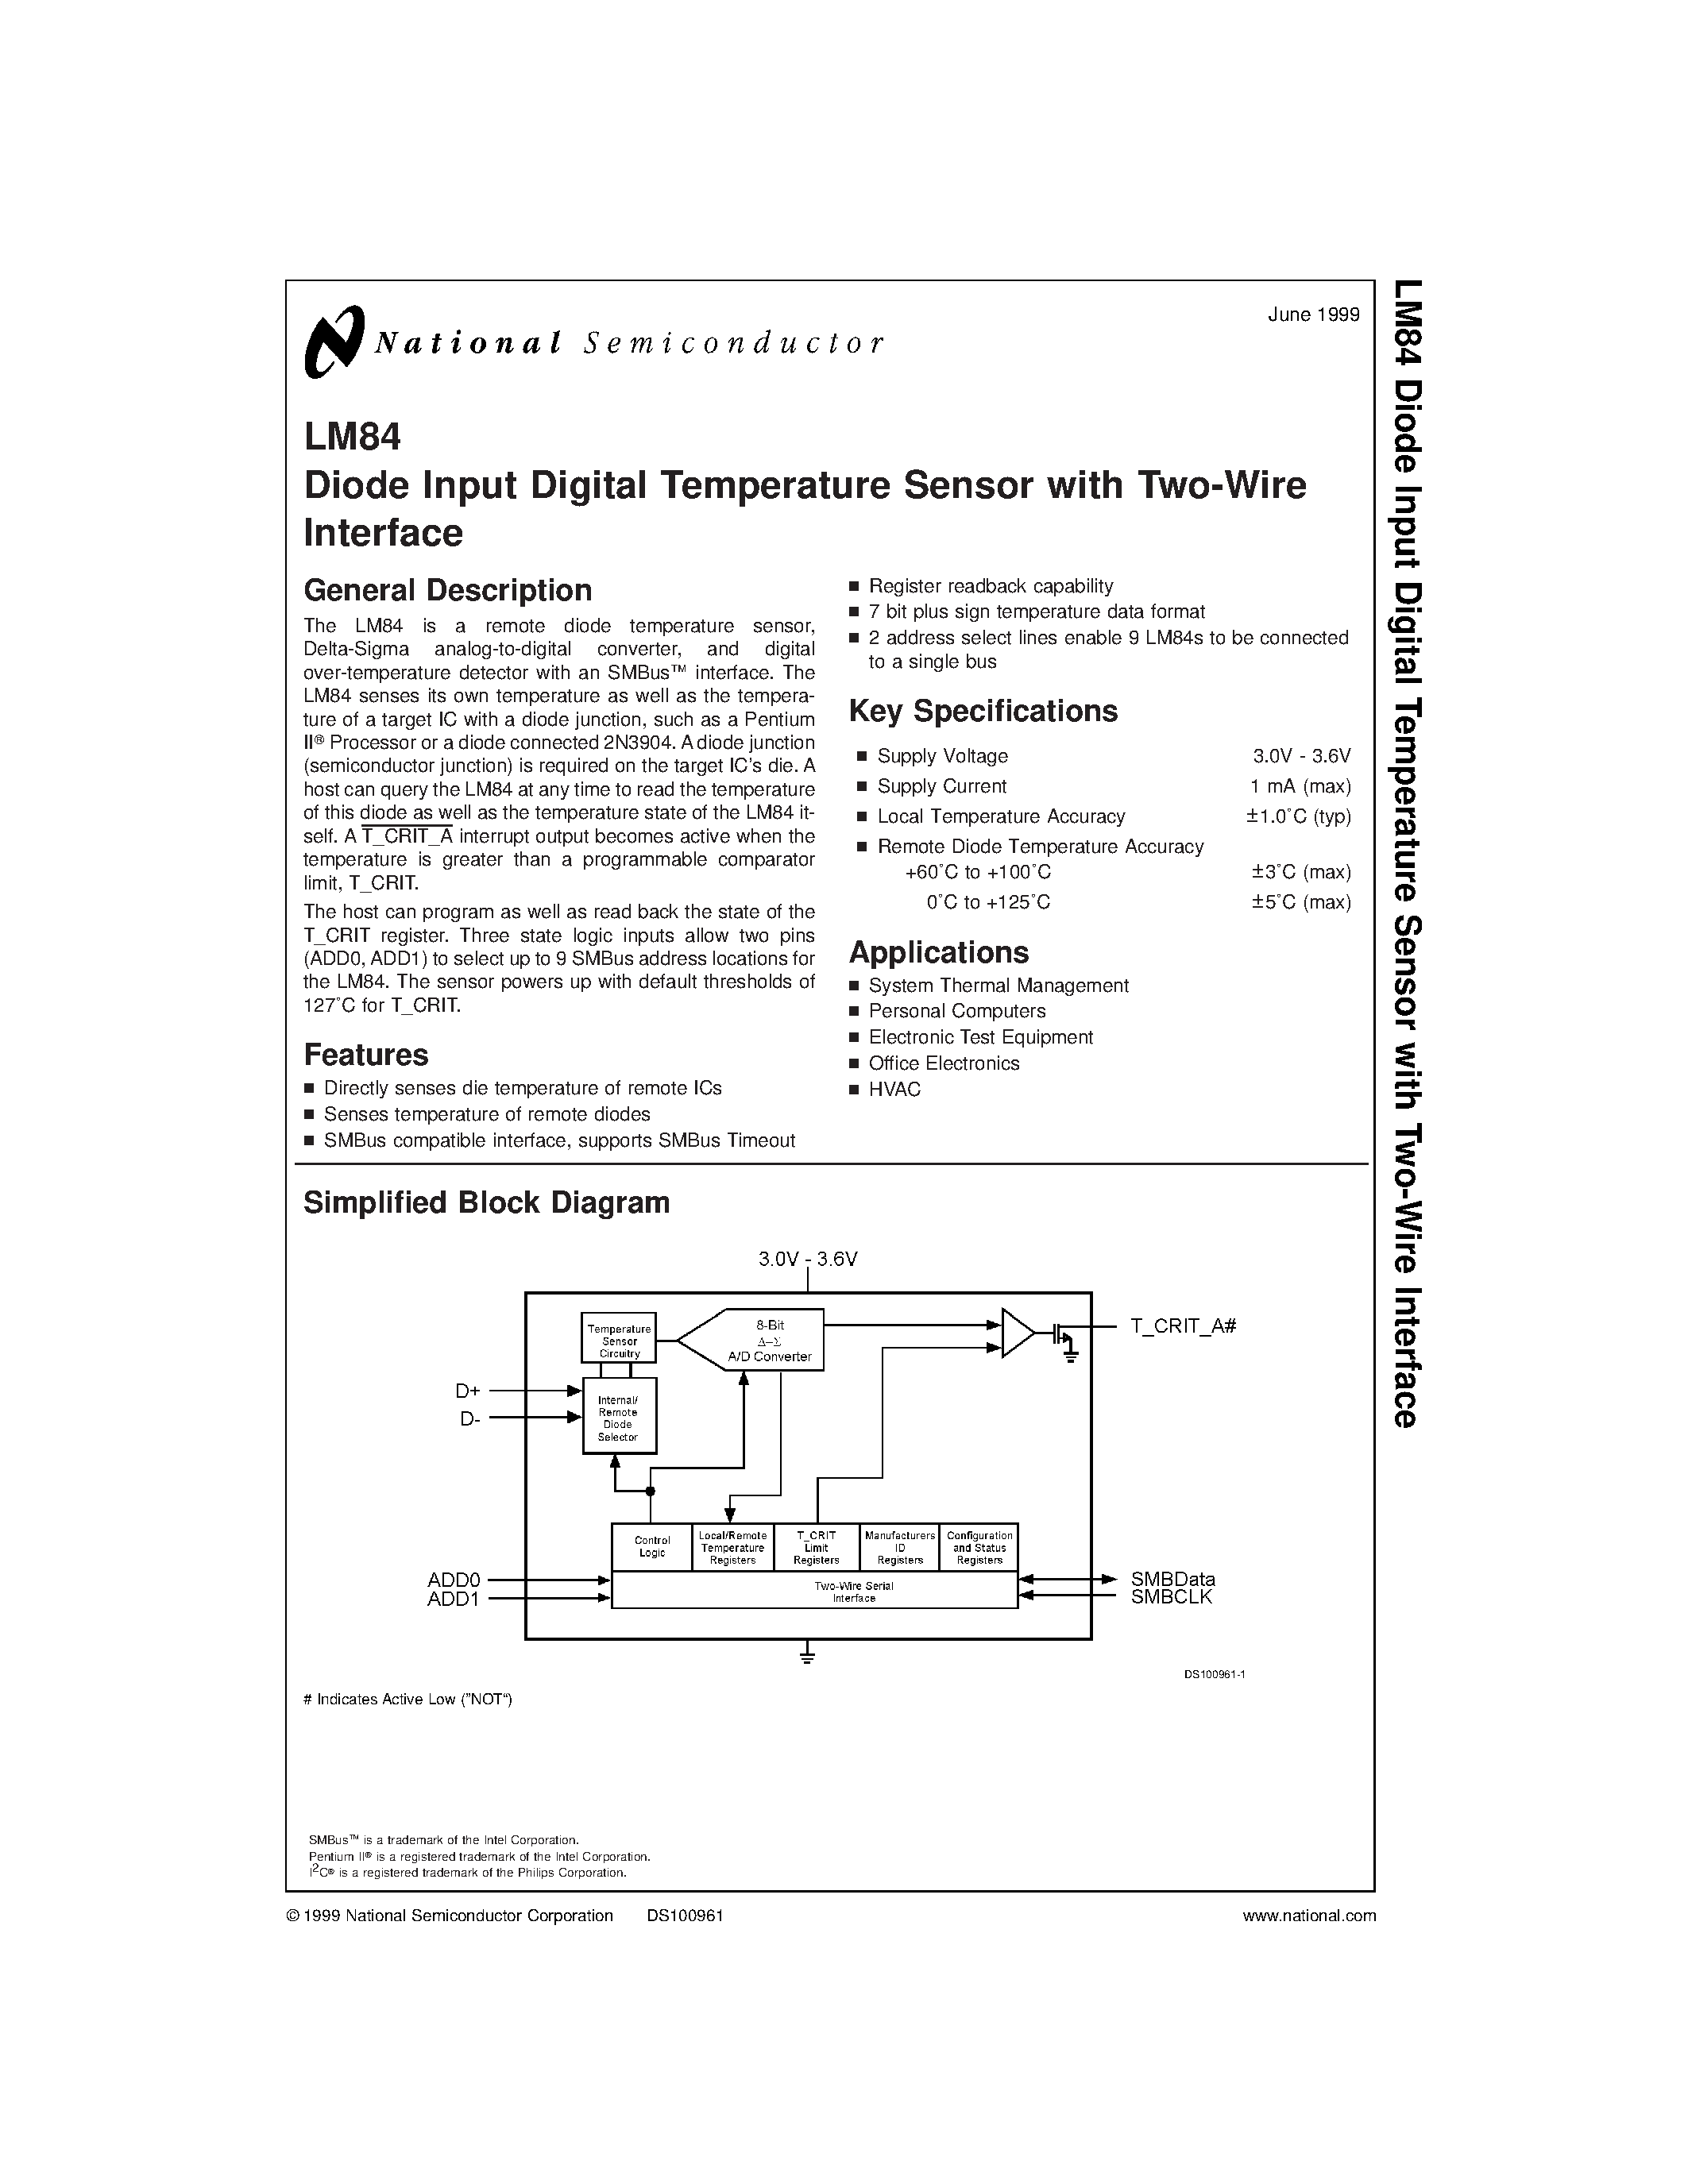 Datasheet LM84CIMQA - Diode Input Digital Temperature Sensor with Two-Wire Interface page 1